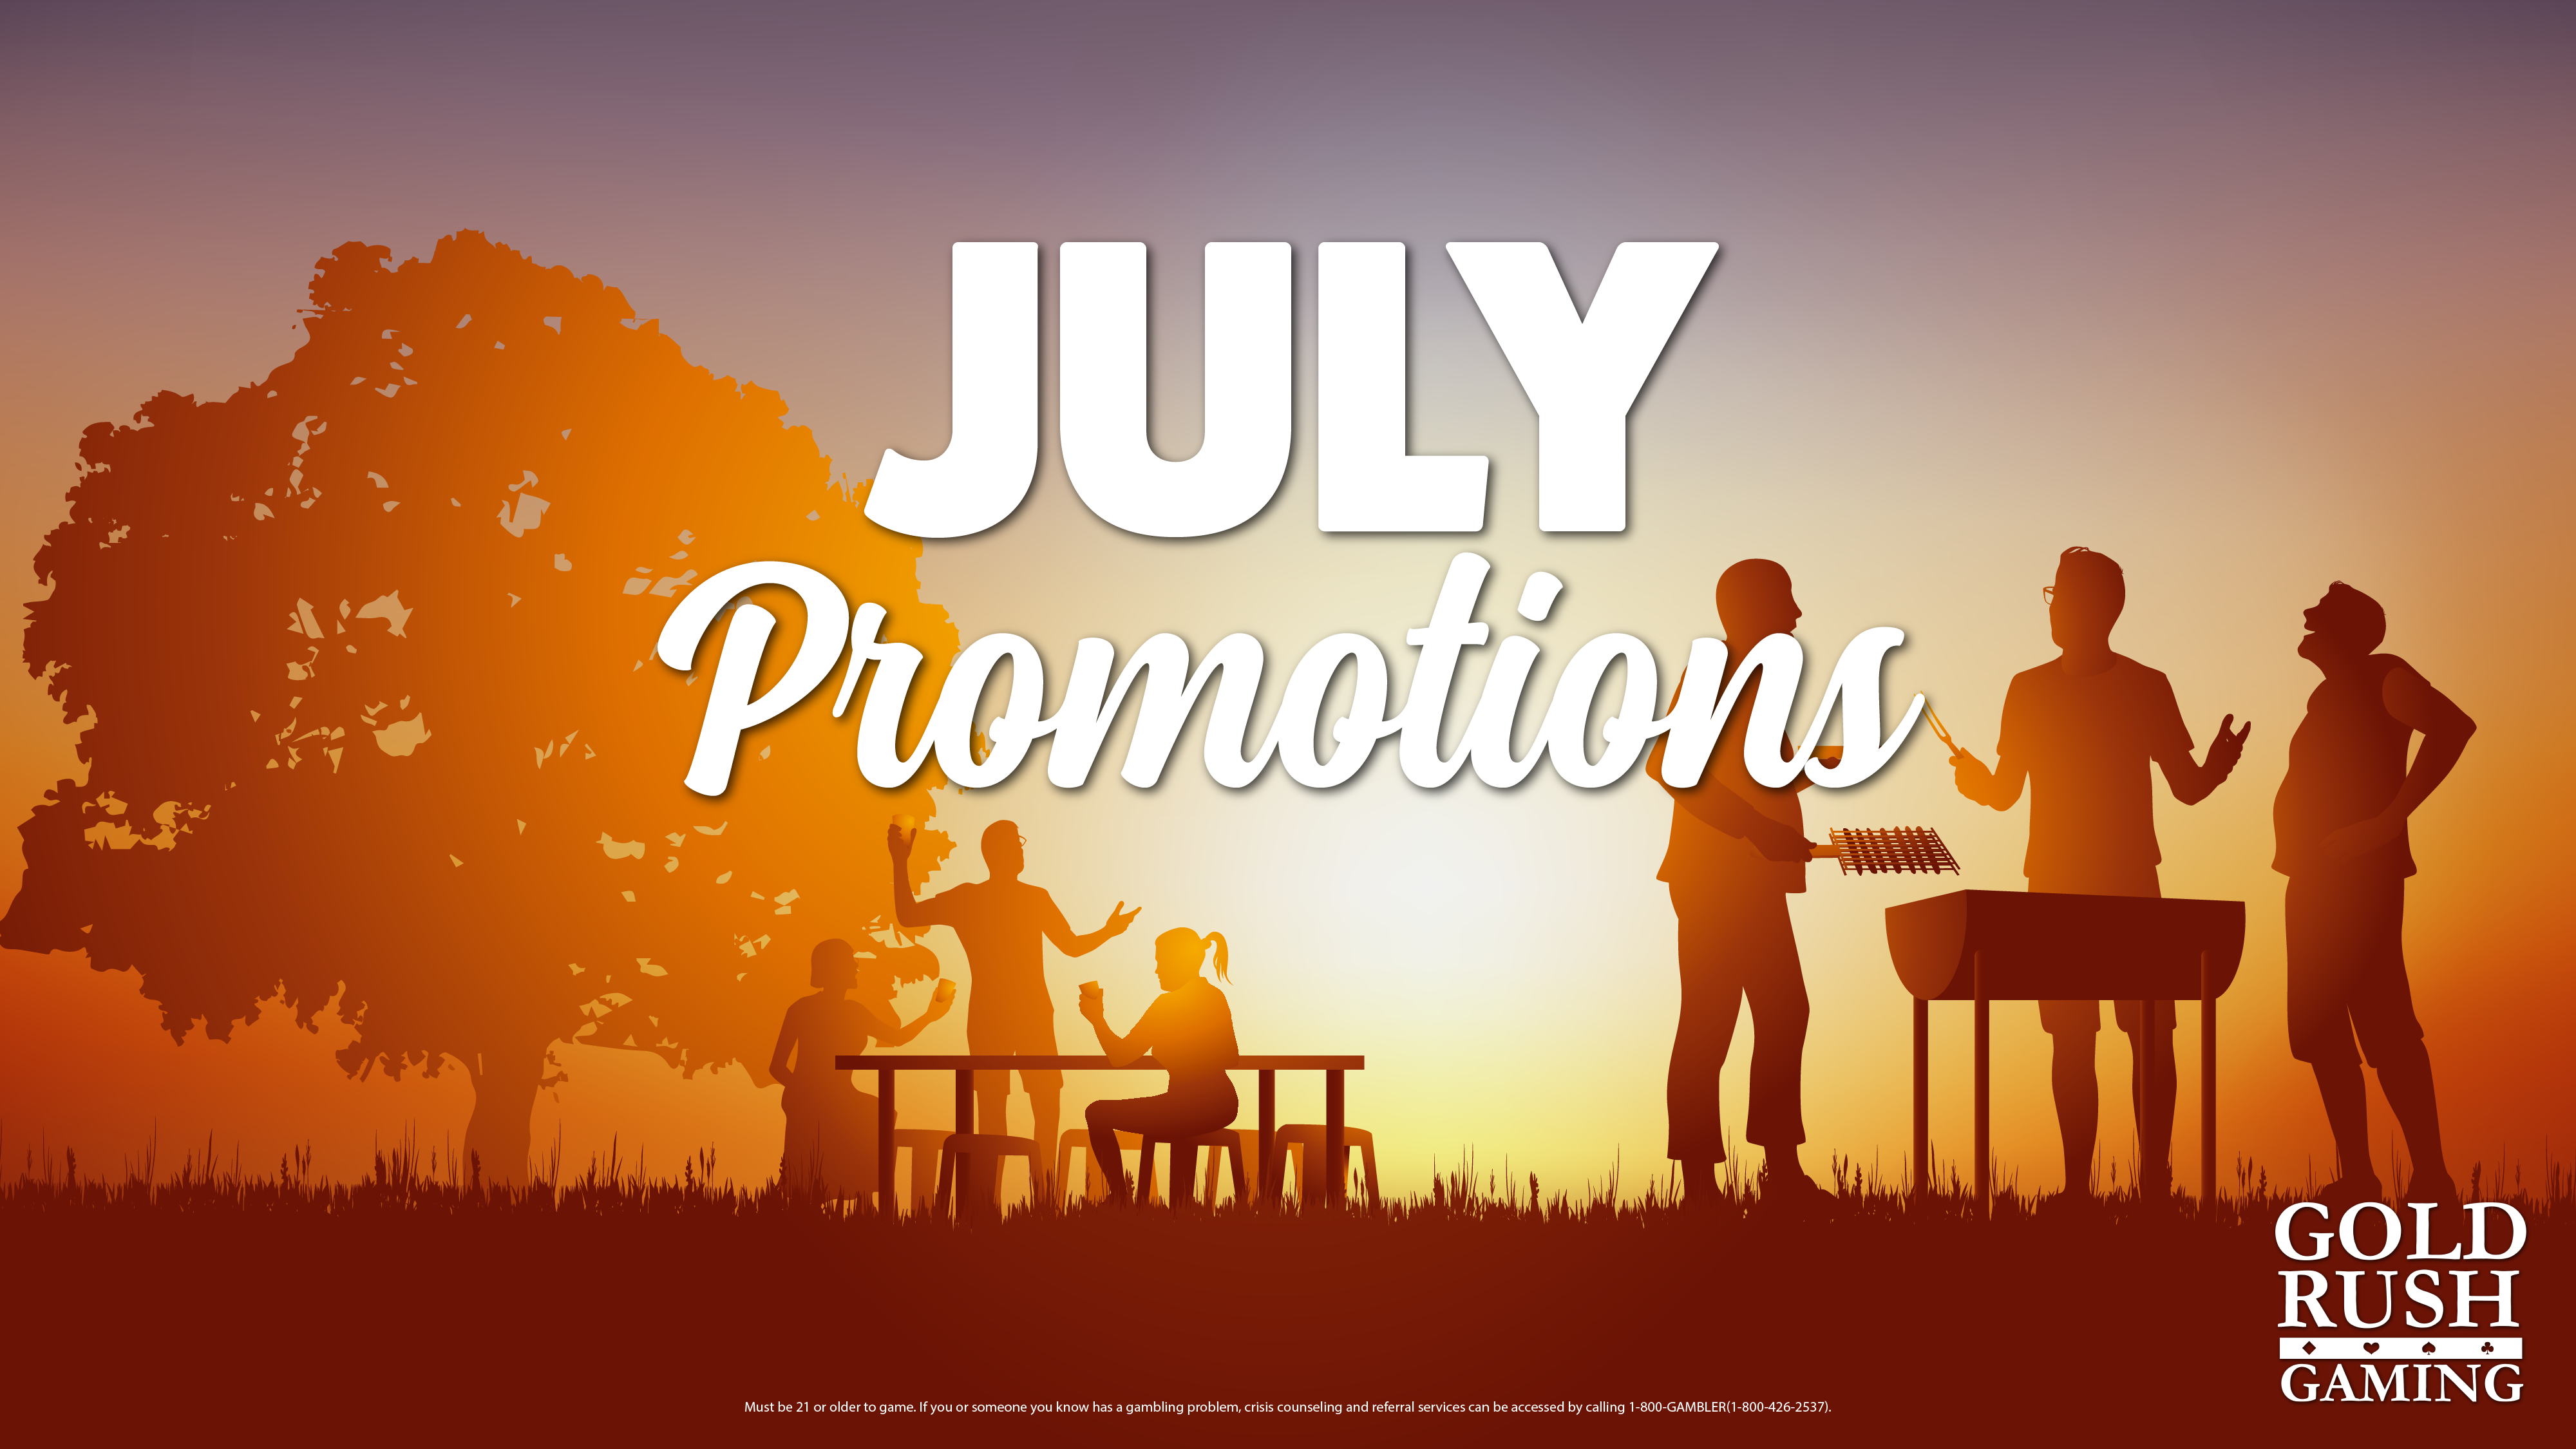 July Custom Partner Promotions Happening with Gold Rush Gaming this month